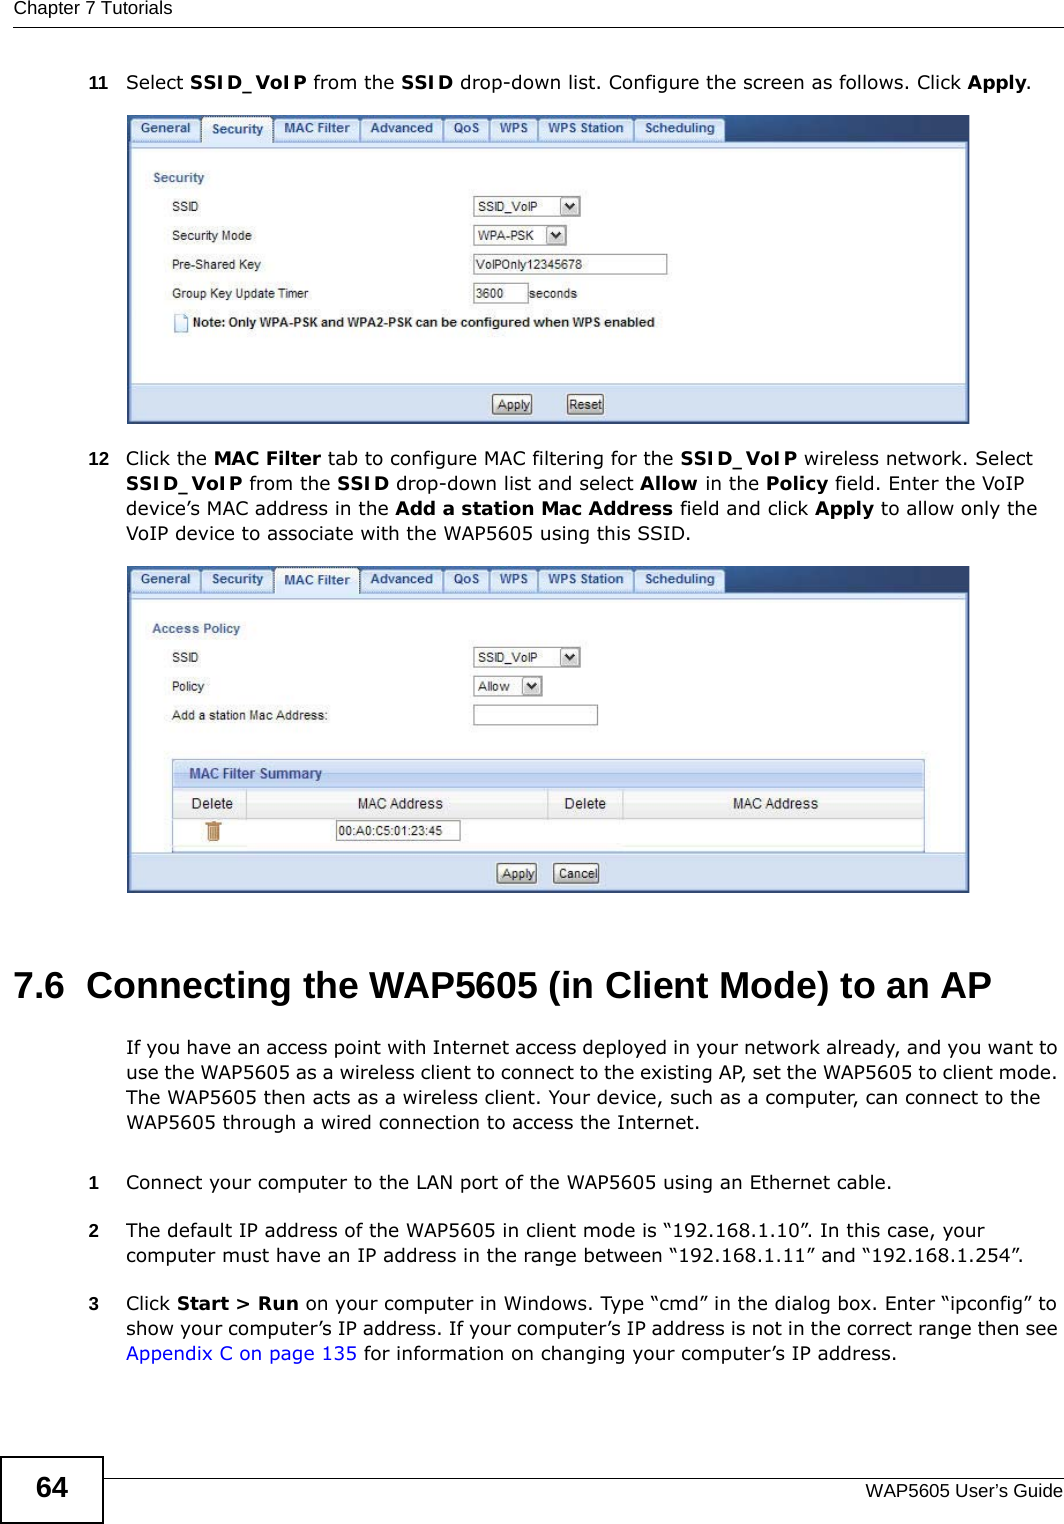 Chapter 7 TutorialsWAP5605 User’s Guide6411 Select SSID_VoIP from the SSID drop-down list. Configure the screen as follows. Click Apply.12 Click the MAC Filter tab to configure MAC filtering for the SSID_VoIP wireless network. Select SSID_VoIP from the SSID drop-down list and select Allow in the Policy field. Enter the VoIP device’s MAC address in the Add a station Mac Address field and click Apply to allow only the VoIP device to associate with the WAP5605 using this SSID.7.6  Connecting the WAP5605 (in Client Mode) to an APIf you have an access point with Internet access deployed in your network already, and you want to use the WAP5605 as a wireless client to connect to the existing AP, set the WAP5605 to client mode. The WAP5605 then acts as a wireless client. Your device, such as a computer, can connect to the WAP5605 through a wired connection to access the Internet.1Connect your computer to the LAN port of the WAP5605 using an Ethernet cable. 2The default IP address of the WAP5605 in client mode is “192.168.1.10”. In this case, your computer must have an IP address in the range between “192.168.1.11” and “192.168.1.254”.3Click Start &gt; Run on your computer in Windows. Type “cmd” in the dialog box. Enter “ipconfig” to show your computer’s IP address. If your computer’s IP address is not in the correct range then see Appendix C on page 135 for information on changing your computer’s IP address.